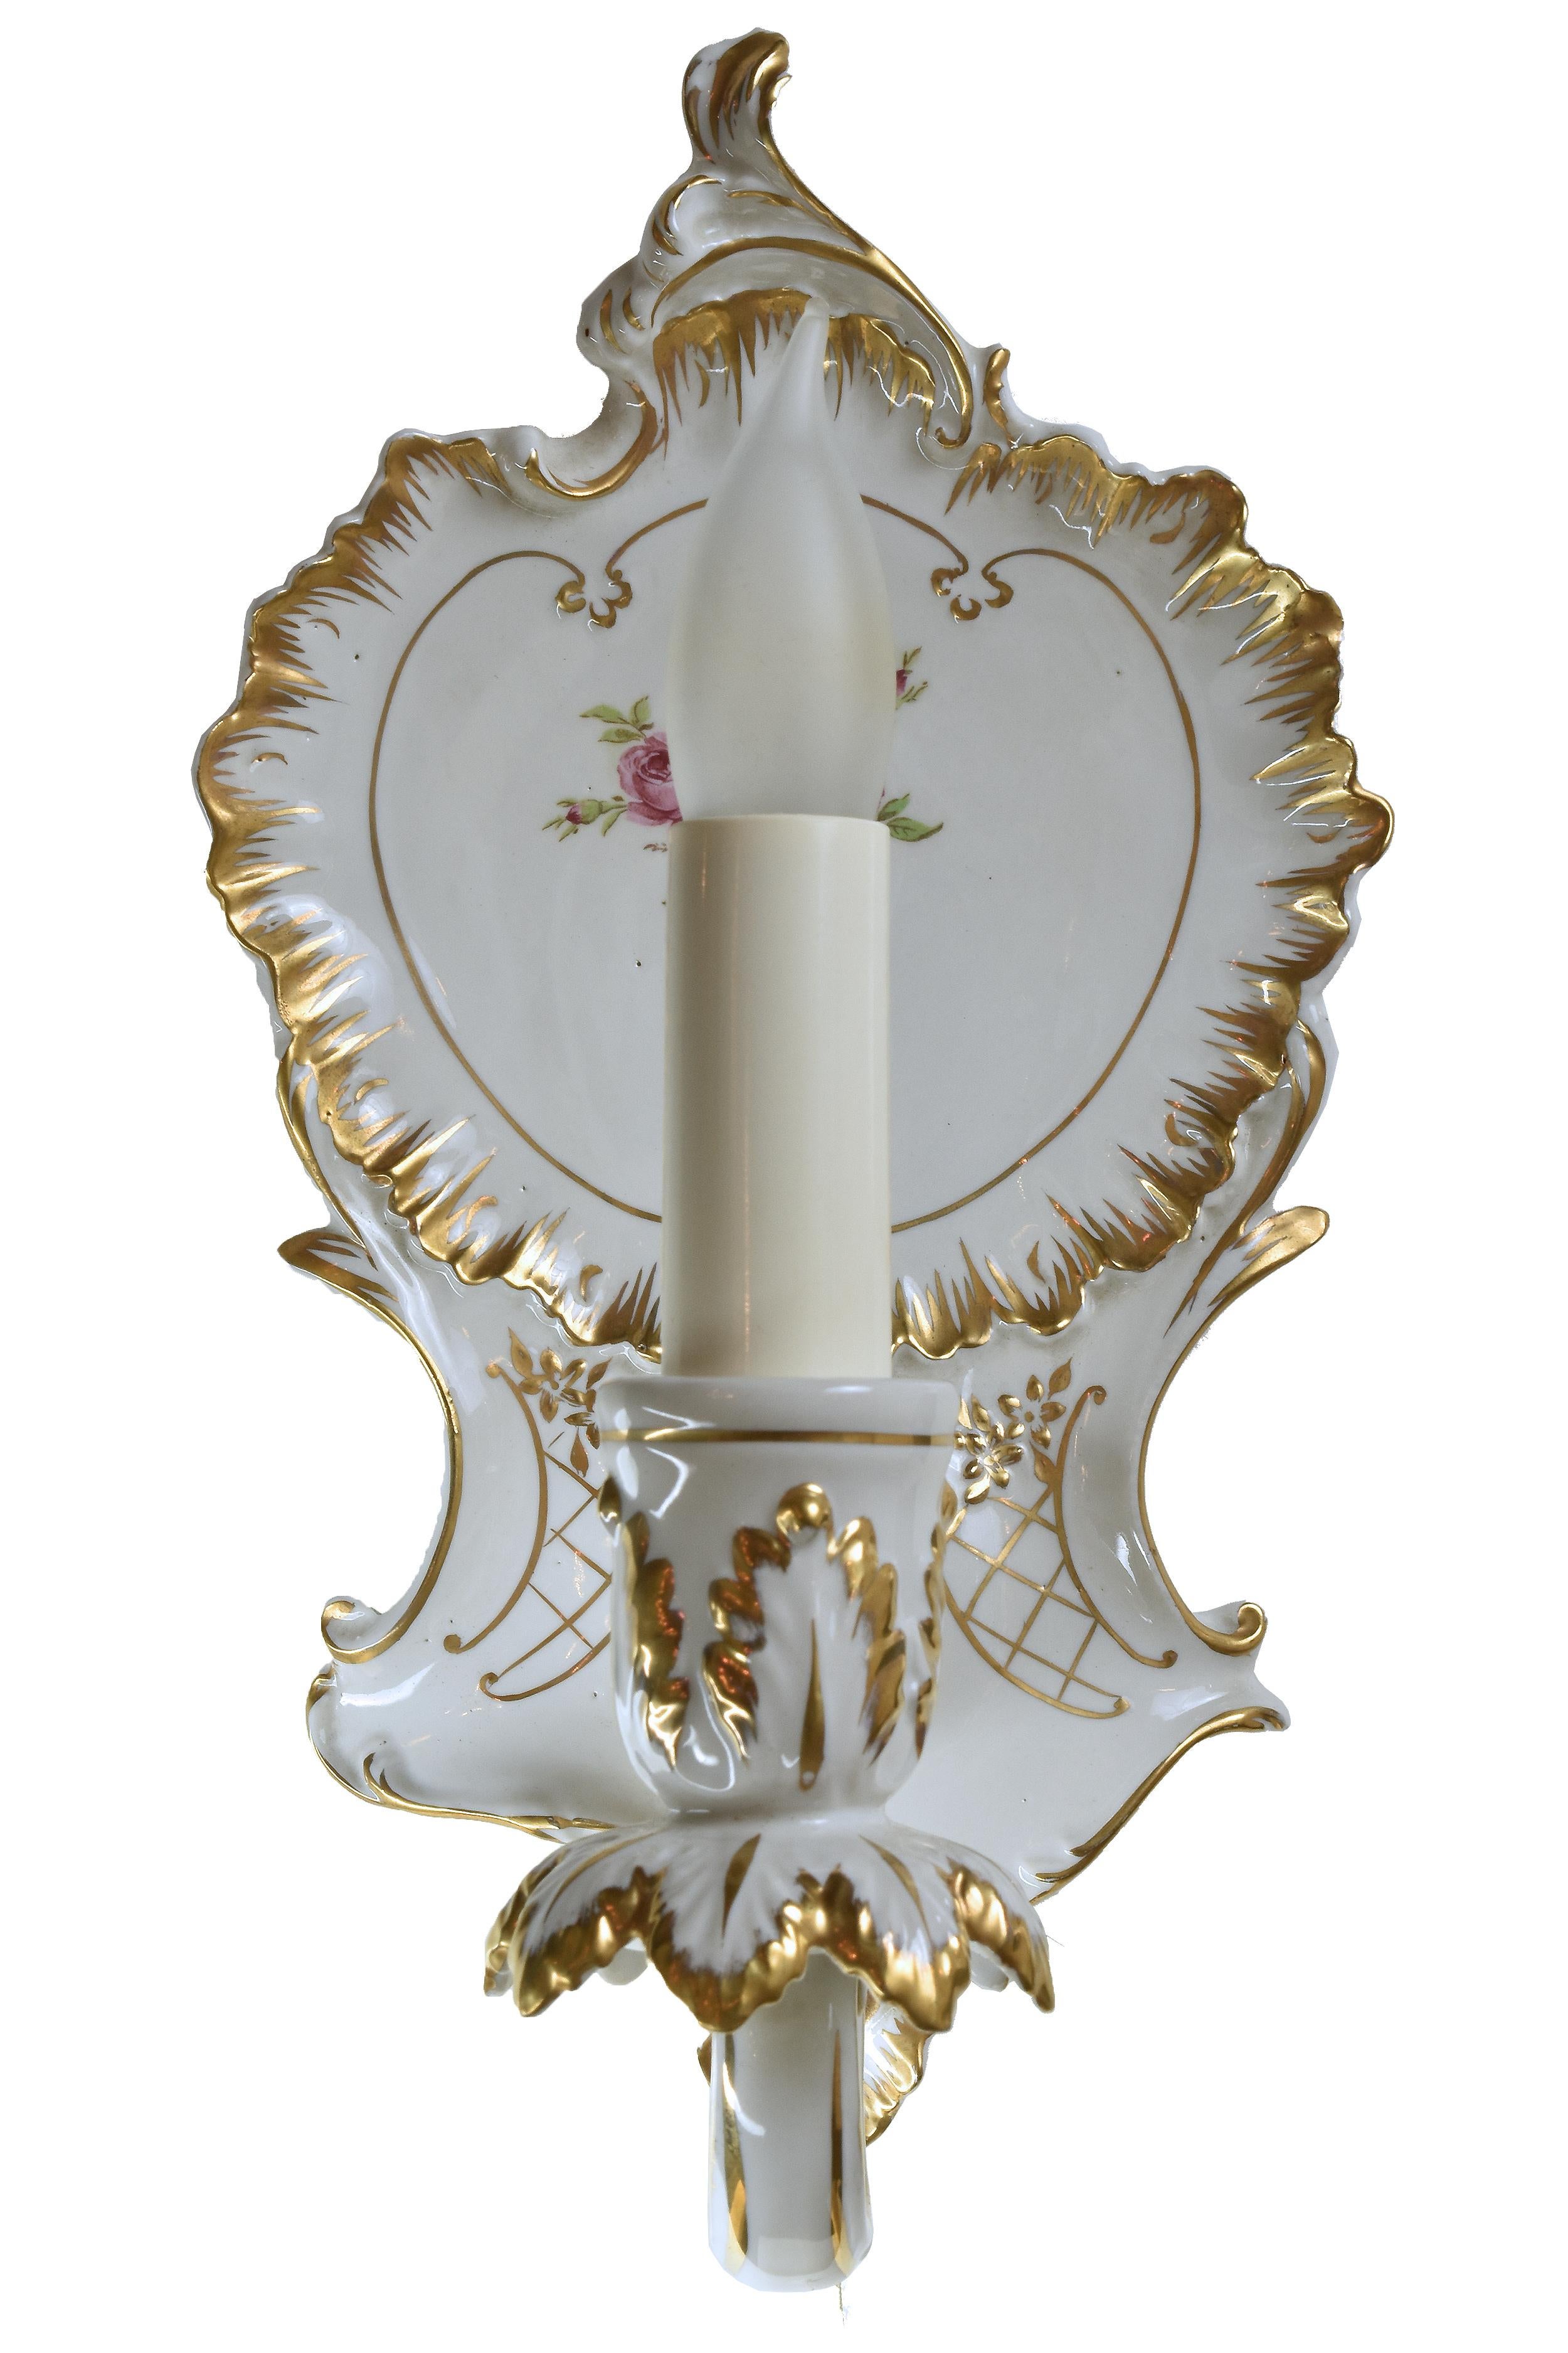 Sold as pair only

These Dresden style sconces are as rare as they are beautiful. Manufactured in the early 1900s, these porcelain light fixtures will make extravagant additions to any room. The interior products associated with Dresden, Germany,